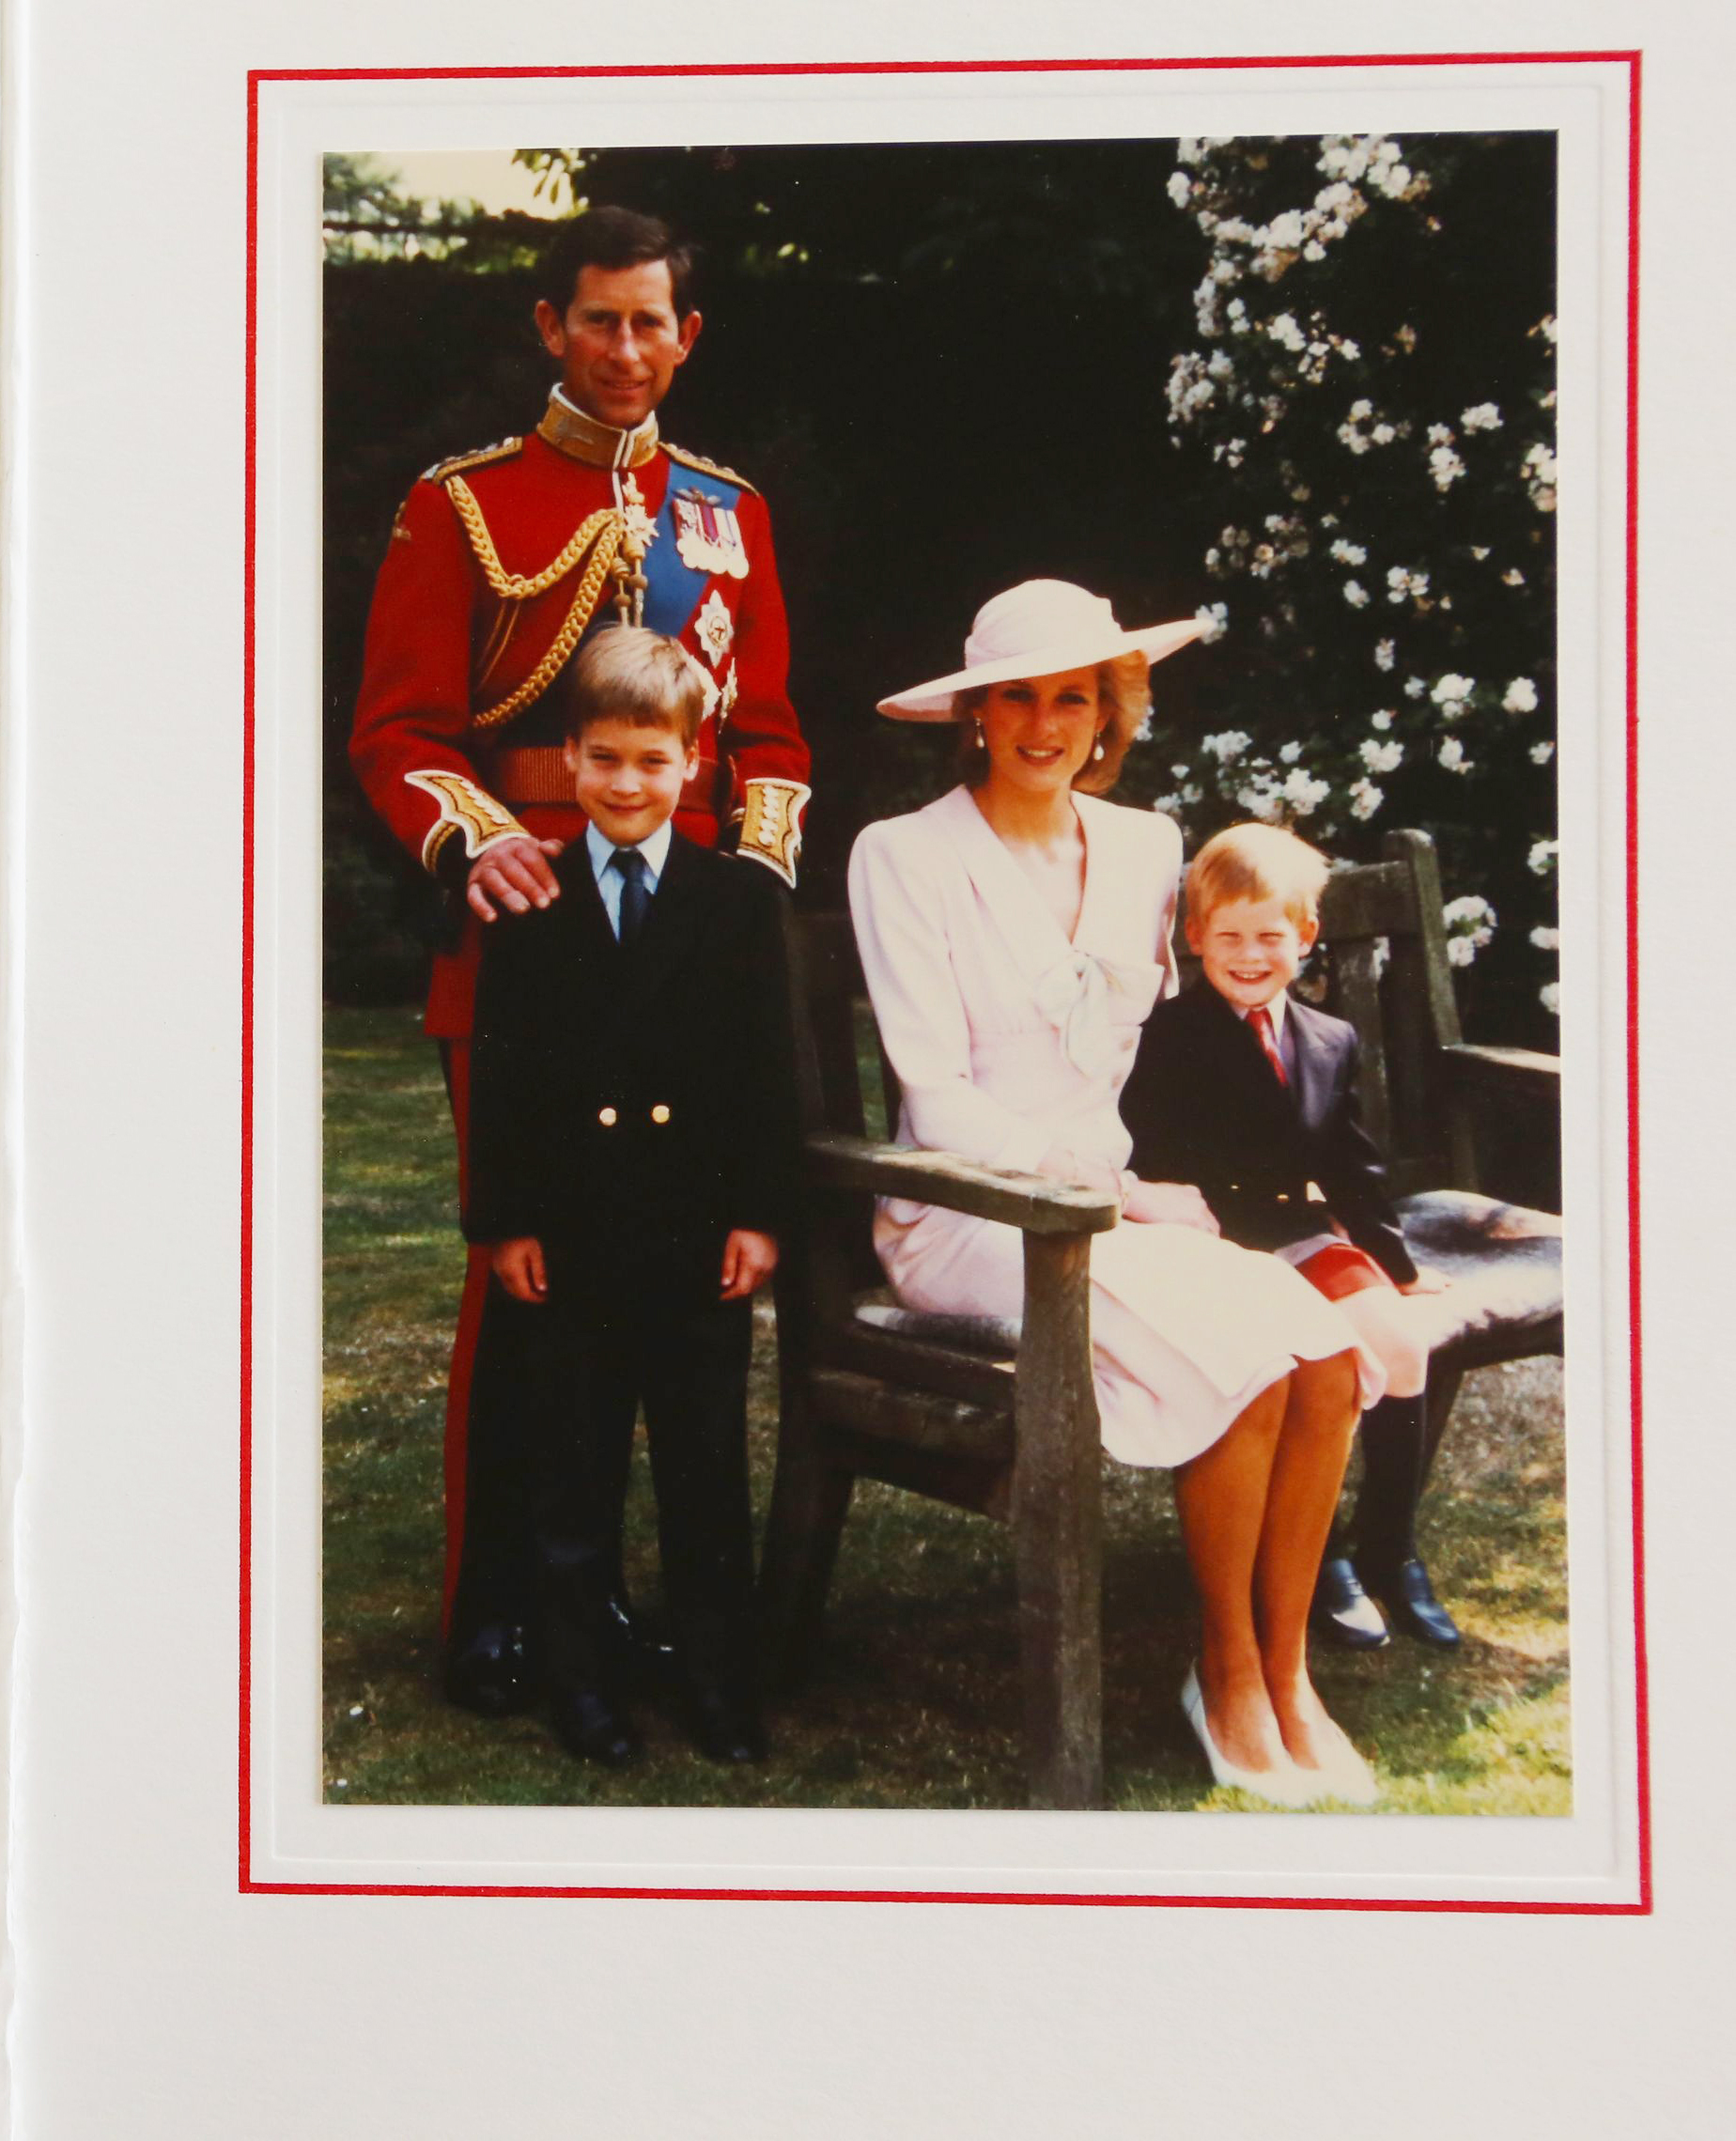 1989 Royal Christmas Card.  Prince Charles and Princess Diana with their children William and Harry.